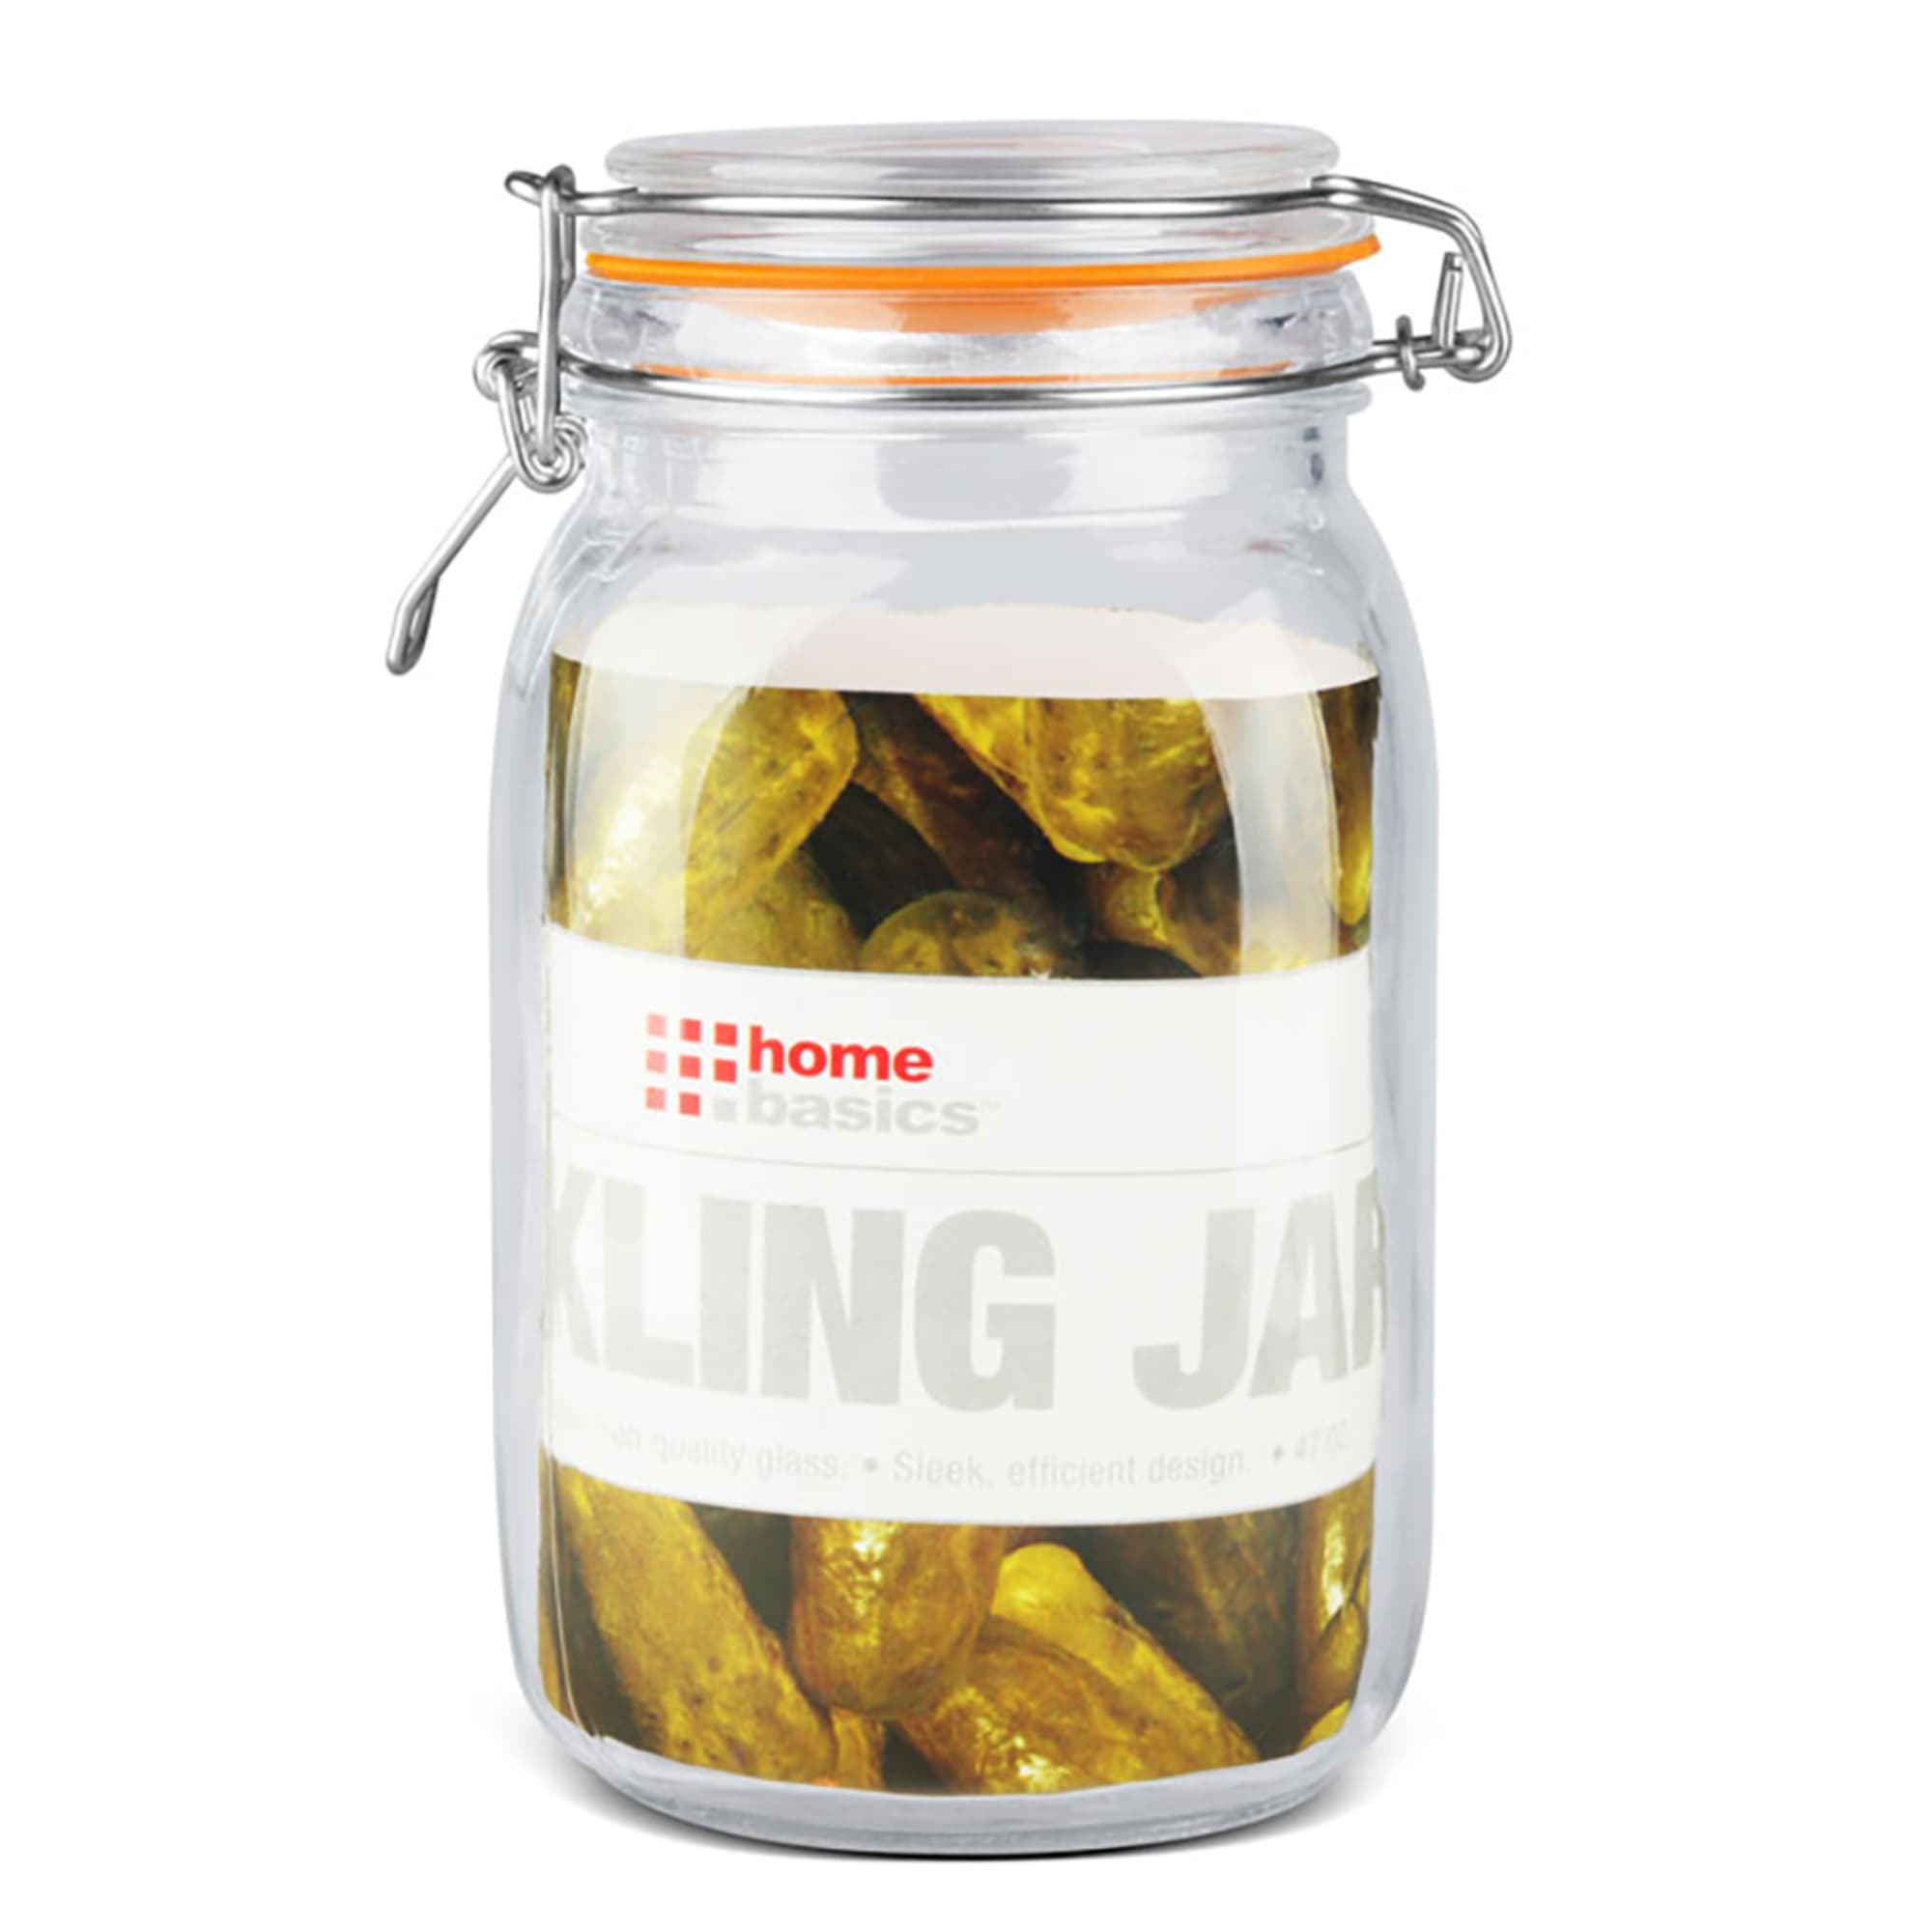 Home Basics 47 oz. Glass Pickling Jar with Wire Bail Lid and Rubber Seal Gasket $4.00 EACH, CASE PACK OF 12